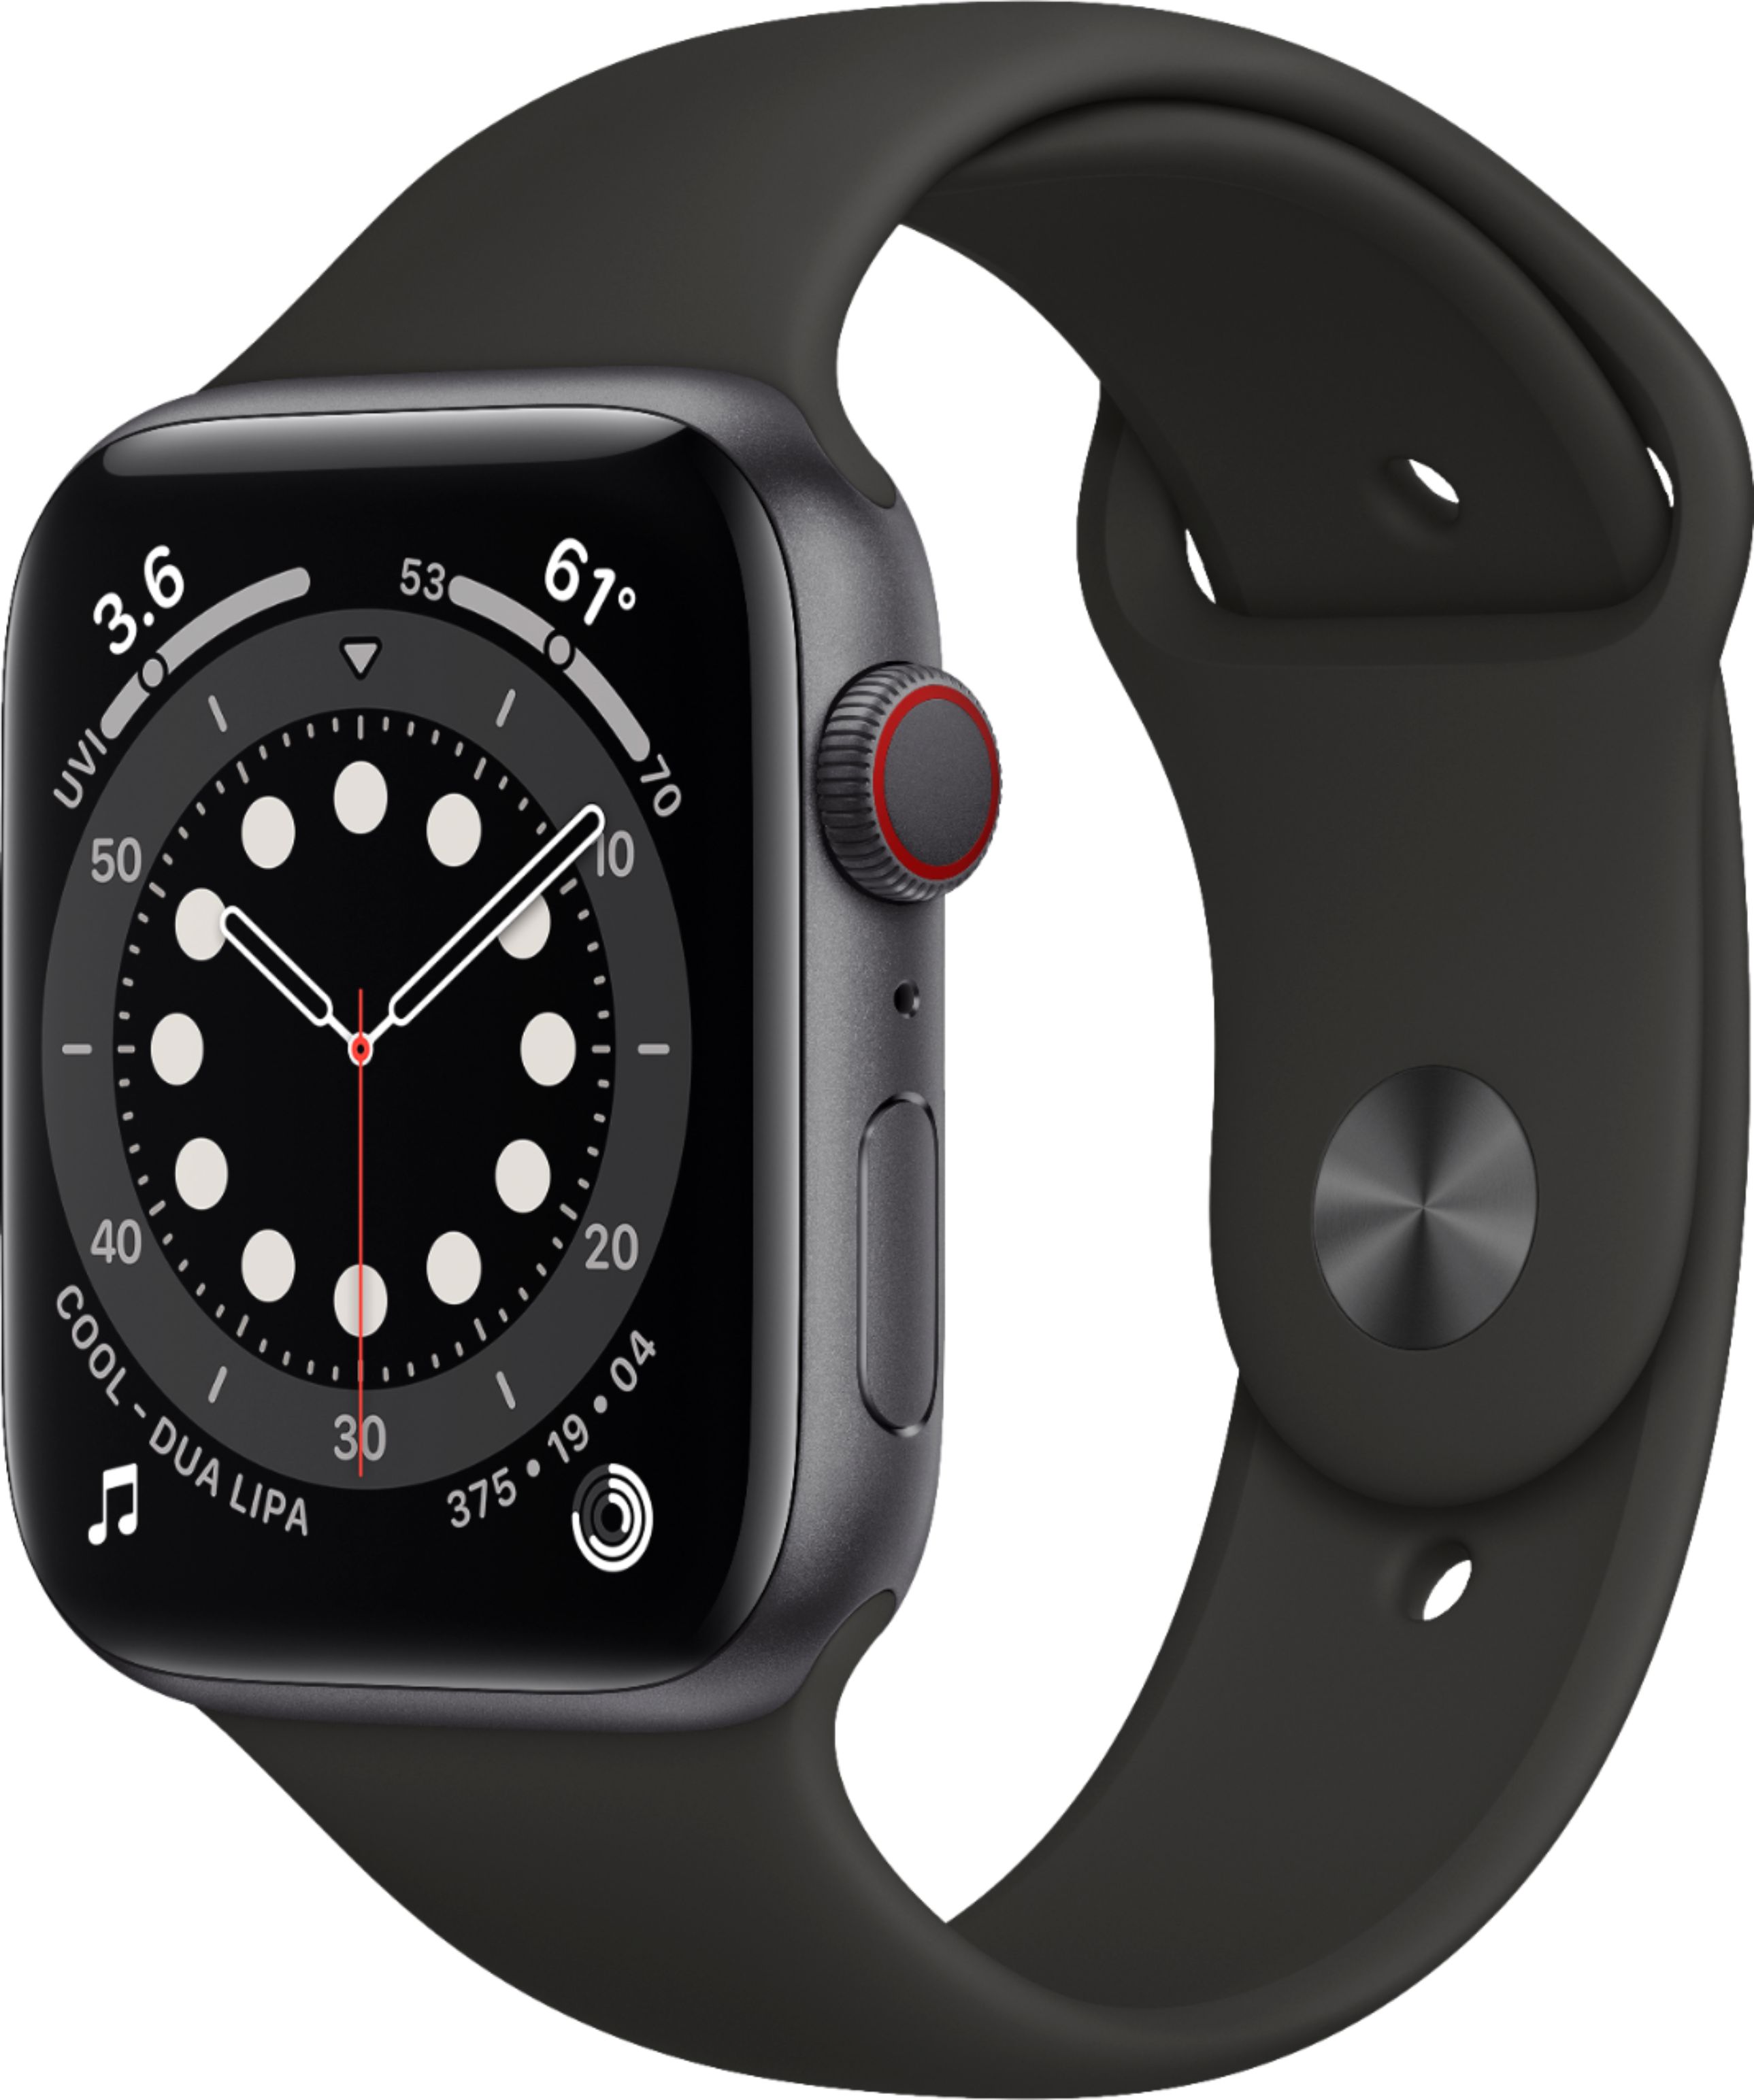 Apple Watch Series 6 (GPS + Cellular) 44mm Space Gray Aluminum Case with Black Sport Band - Space Gray